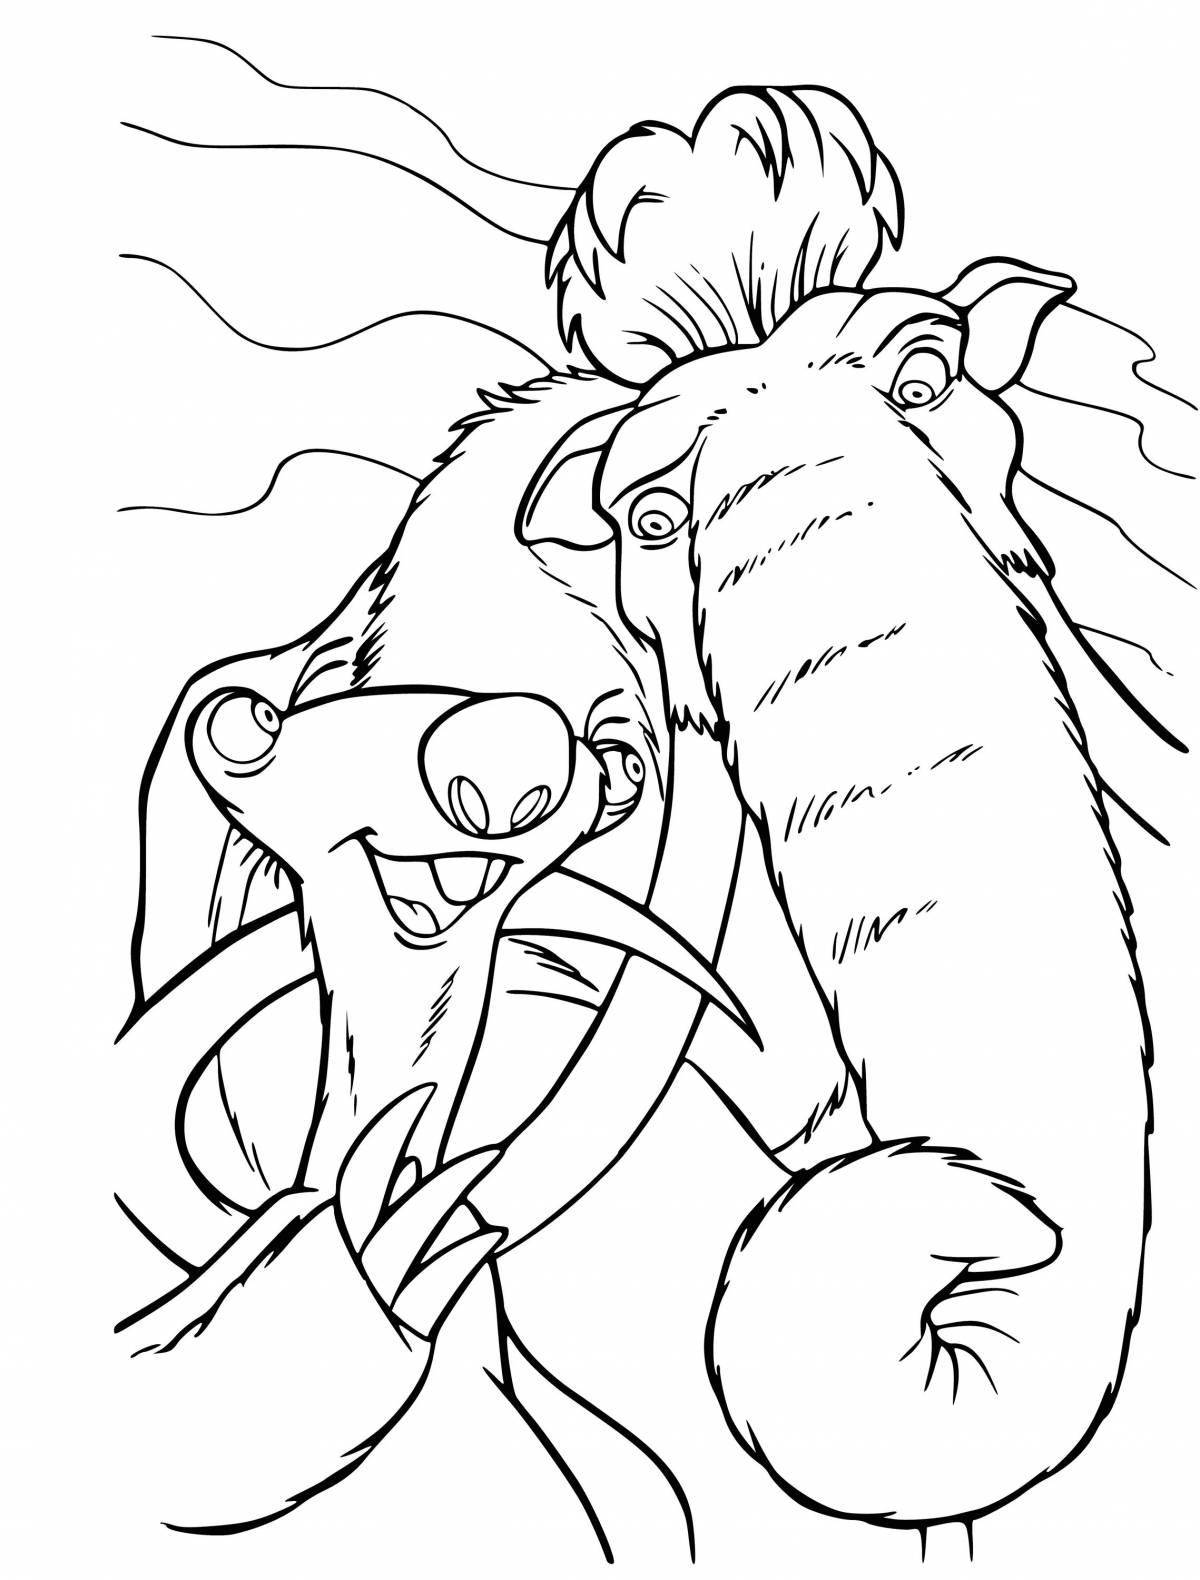 Awesome Ice Age Coloring Book for Kids